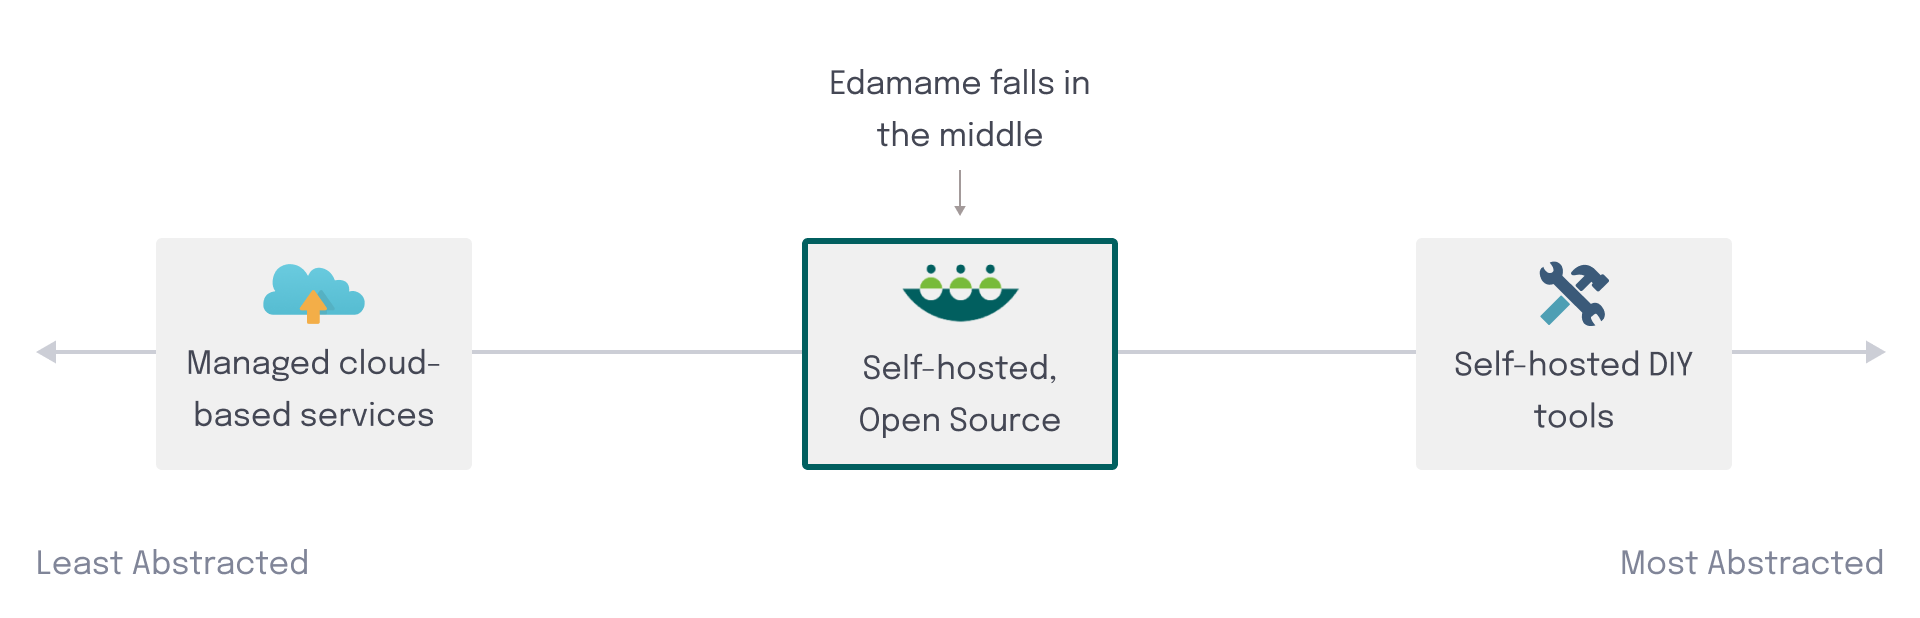 Diagram demonstrating how Edamame lies in the middle of a spectrum ranging from managed cloud-based serverices and self-hosted DIY tools